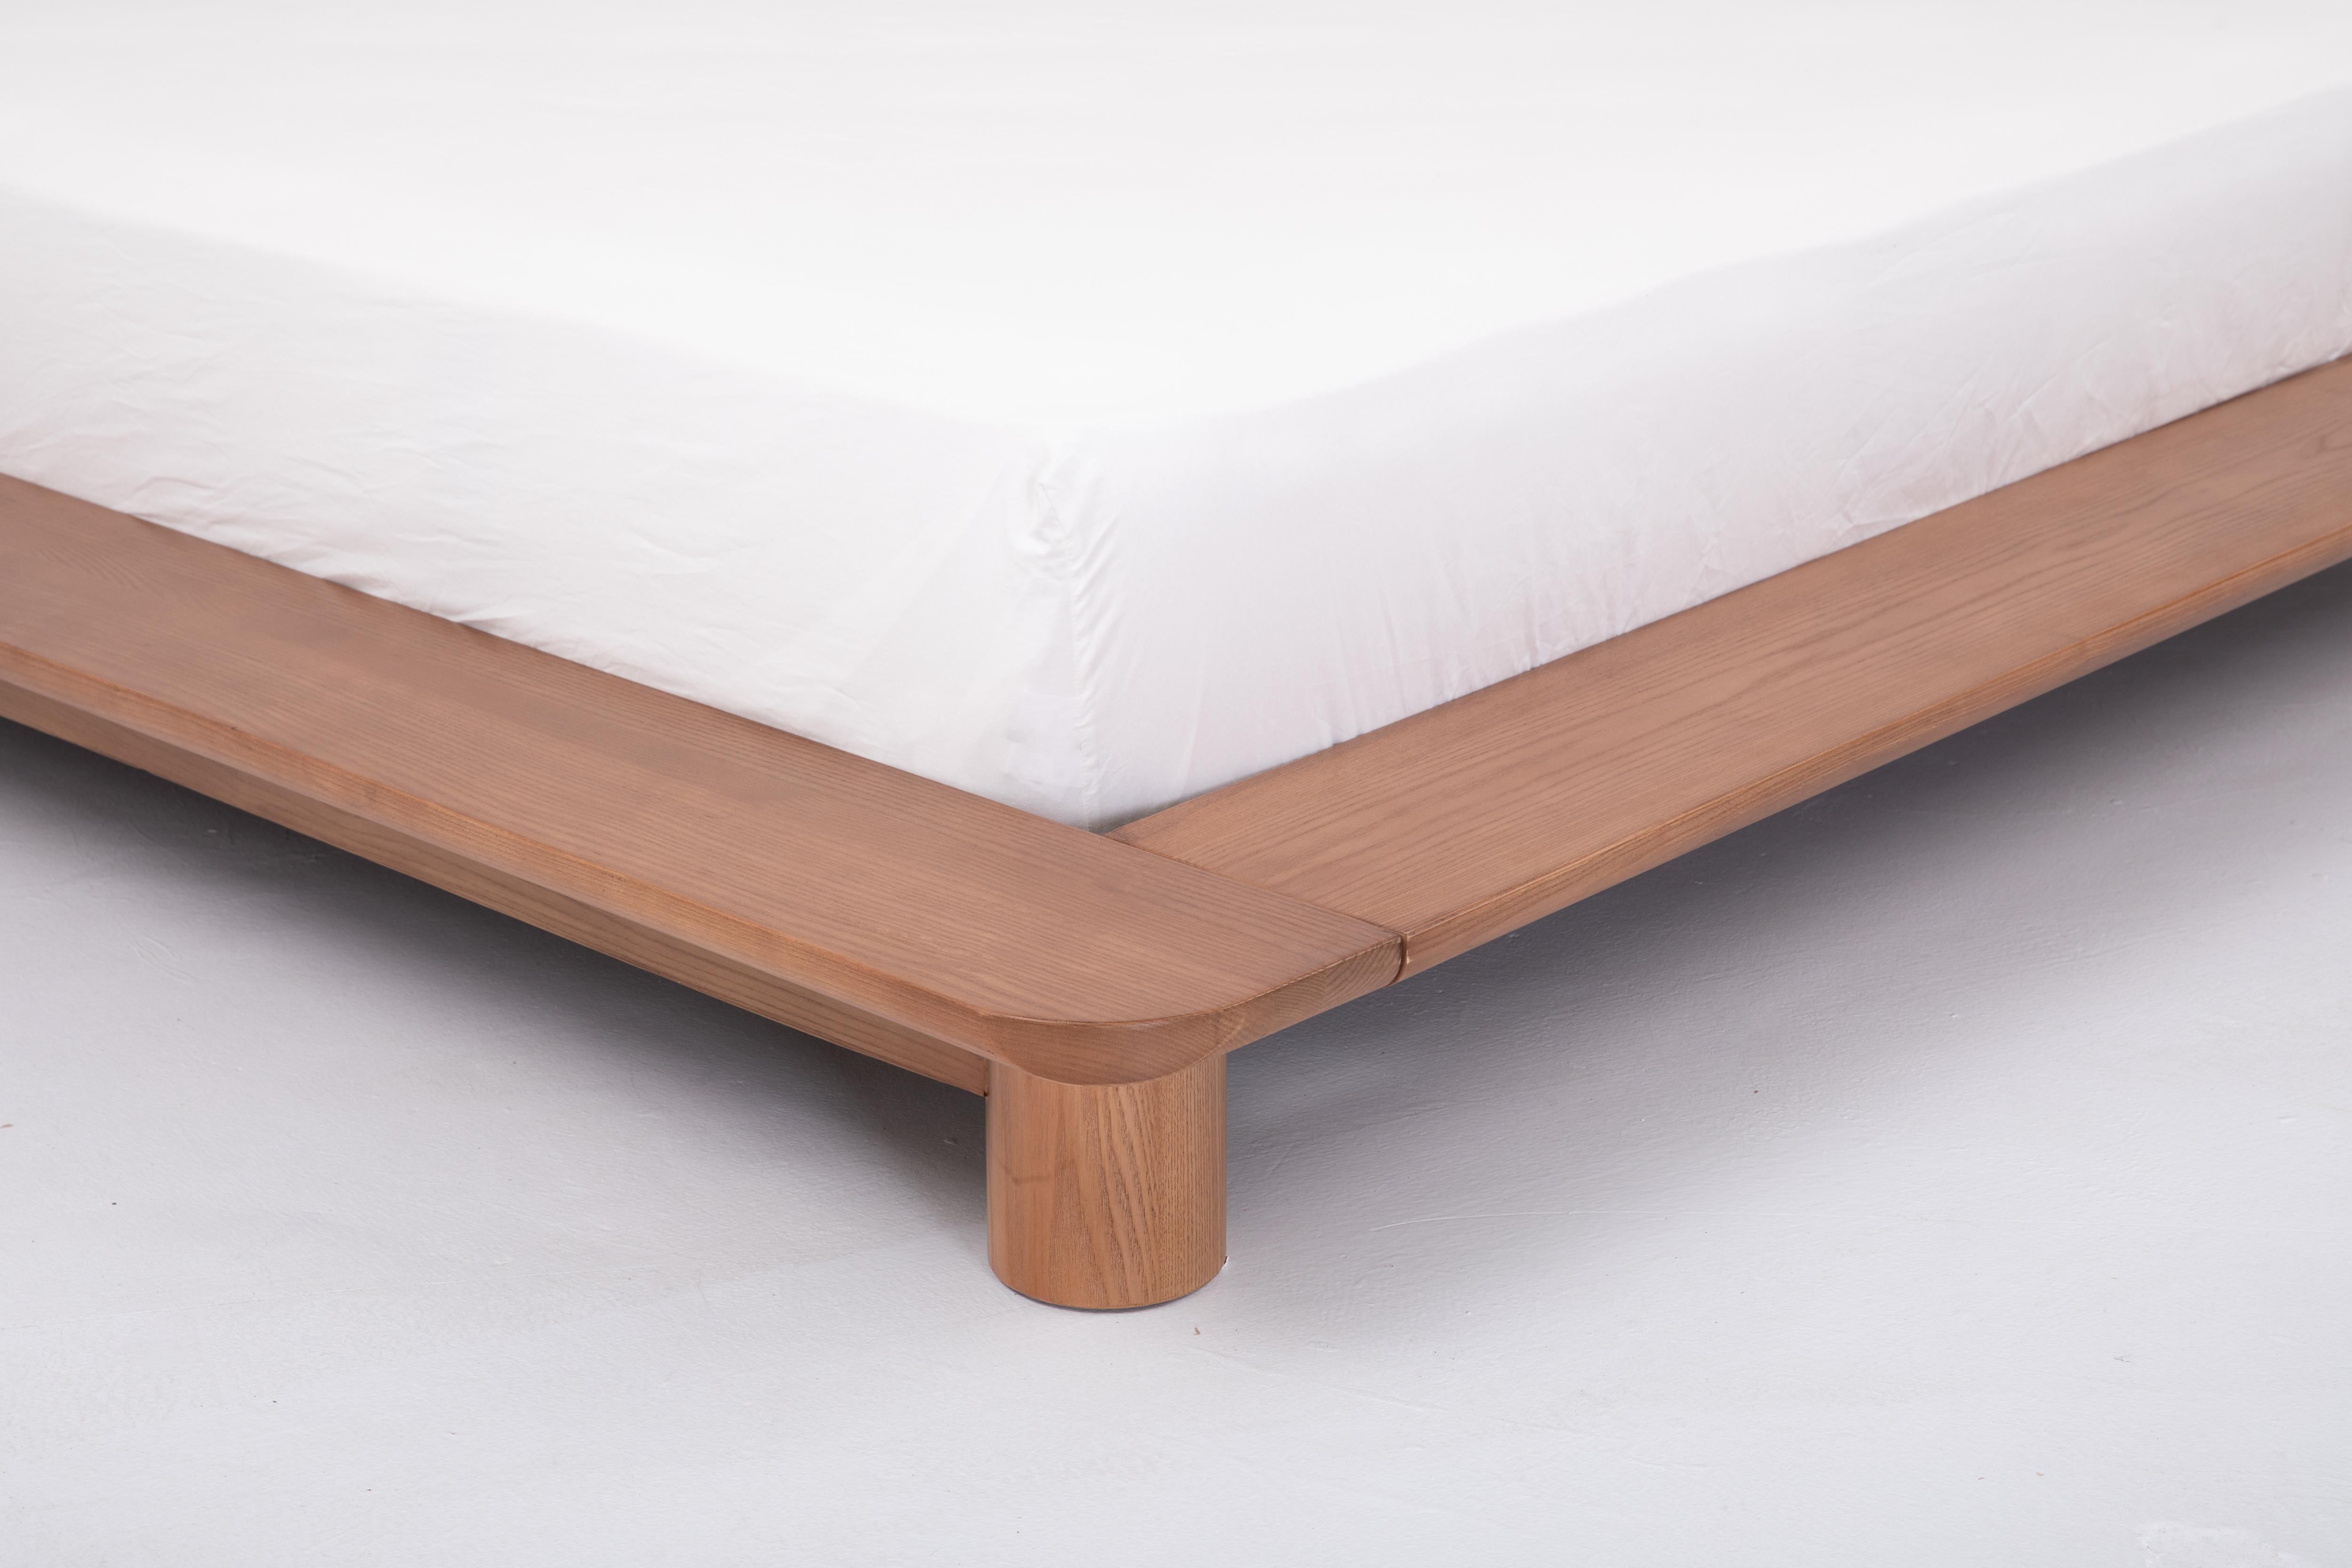 Joinery Kiral Platform King Bed in Sienna by Sun at Six, Minimalist King Bed in Wood For Sale